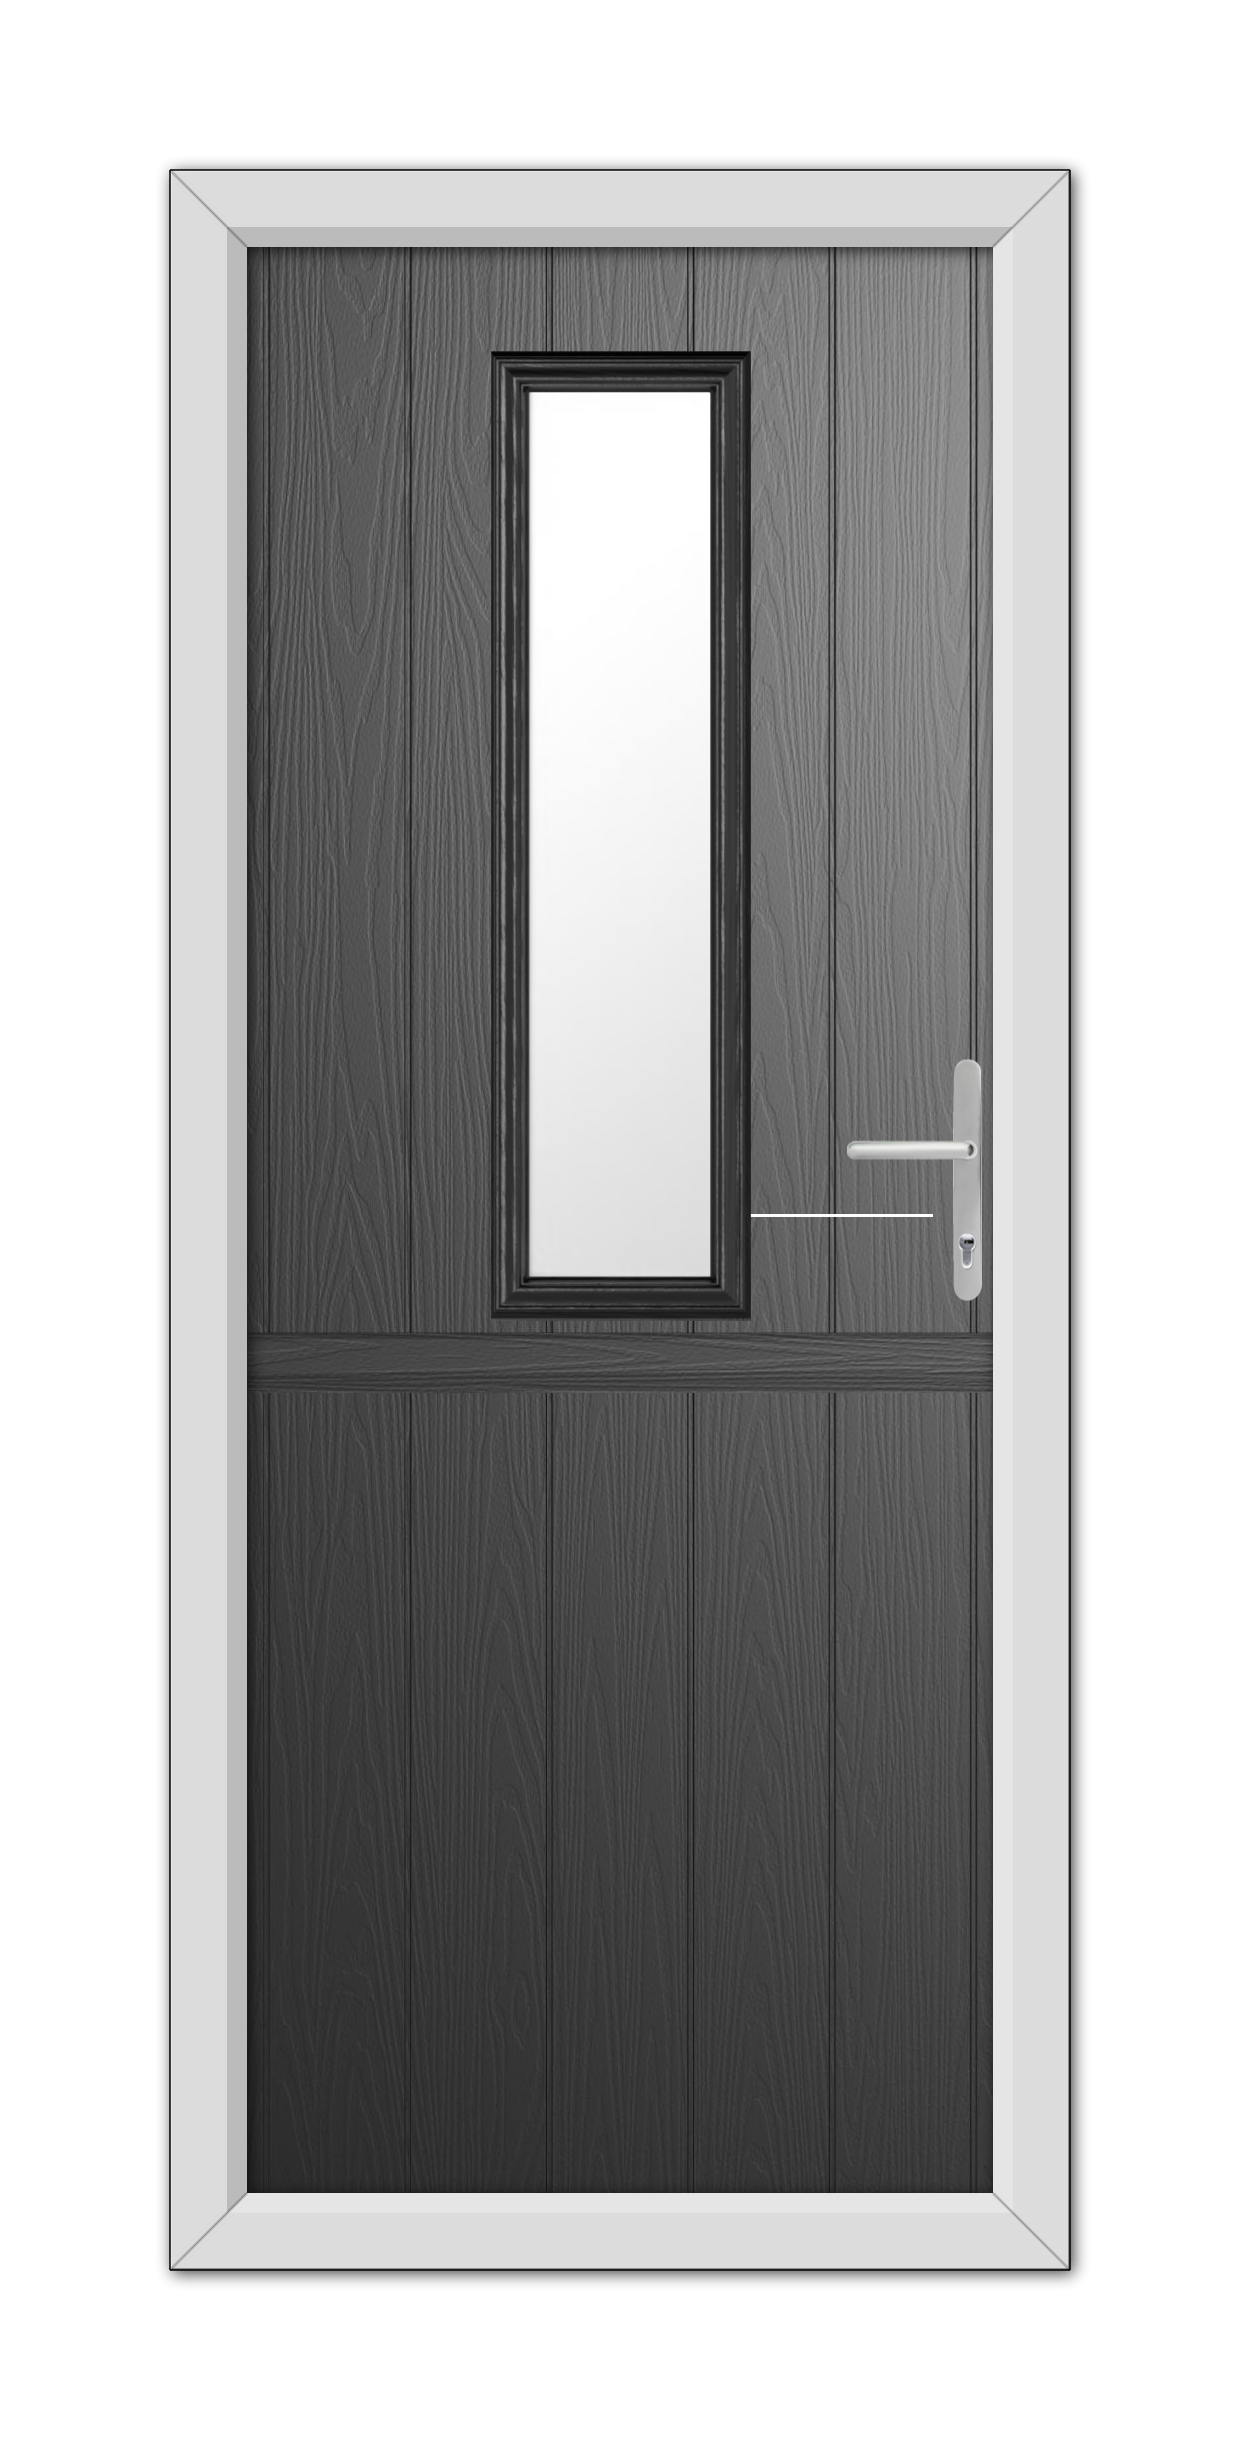 Black Mowbray Stable Composite Door 48mm Timber Core with a small rectangular window and metallic handle, set in a white frame.